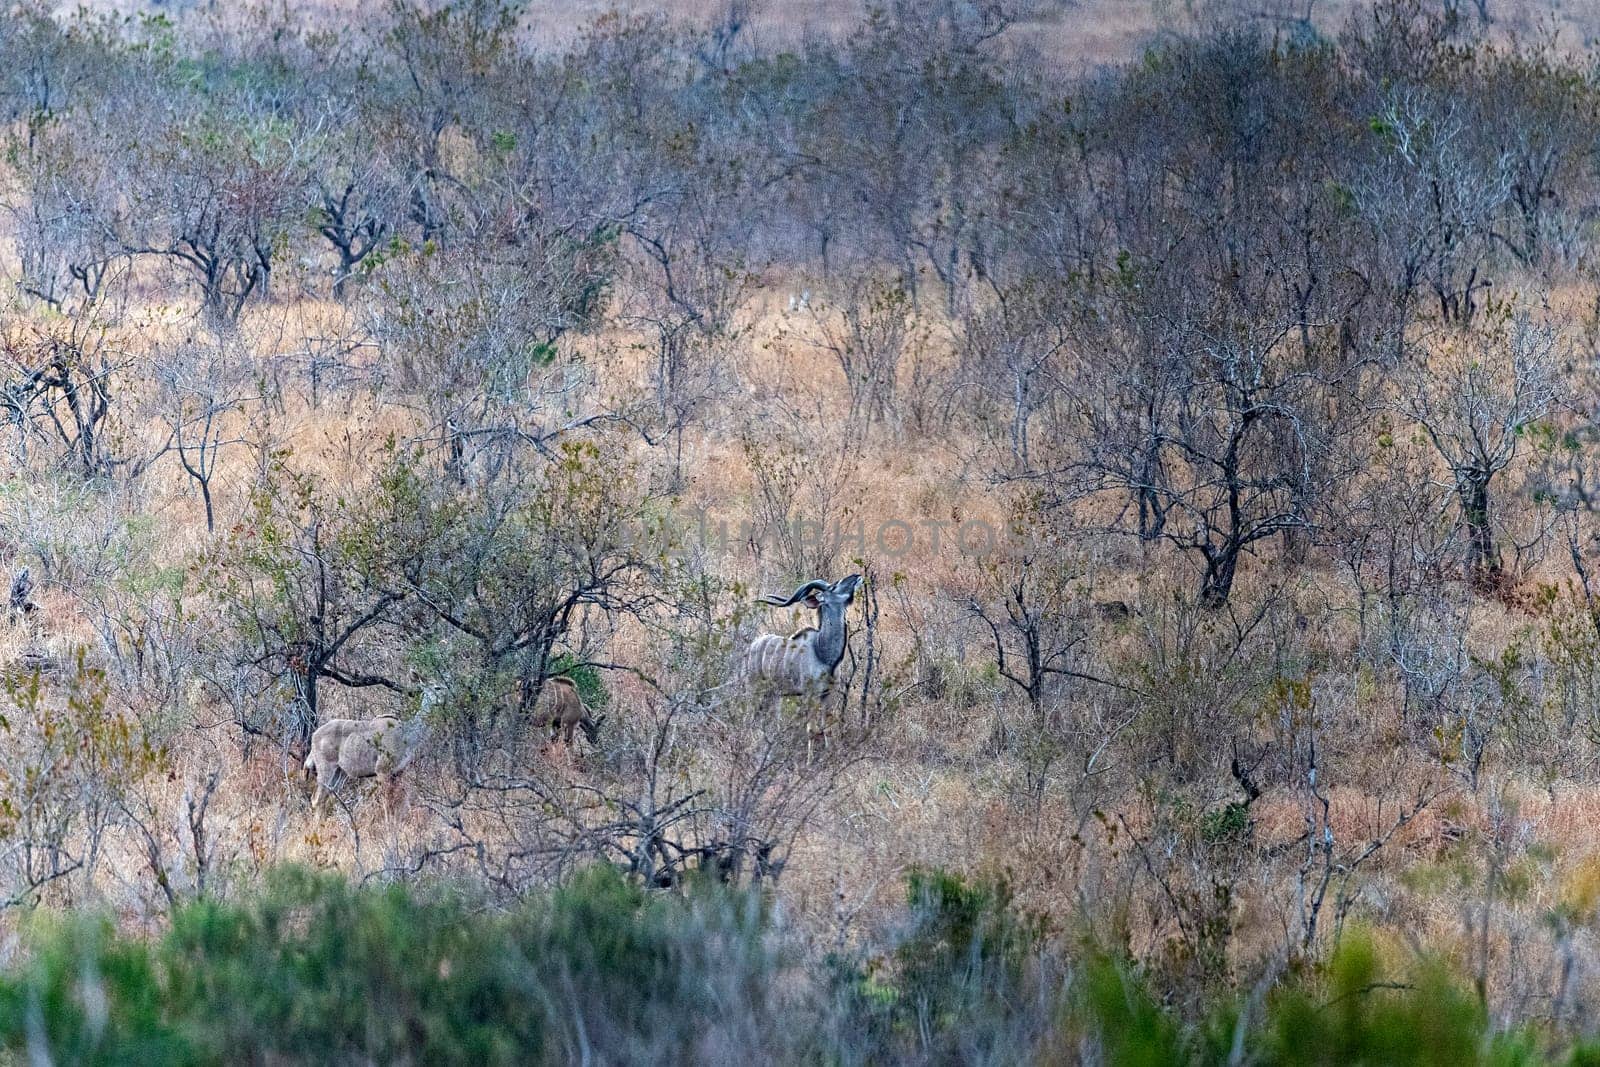 Kudu in kruger park by AndreaIzzotti